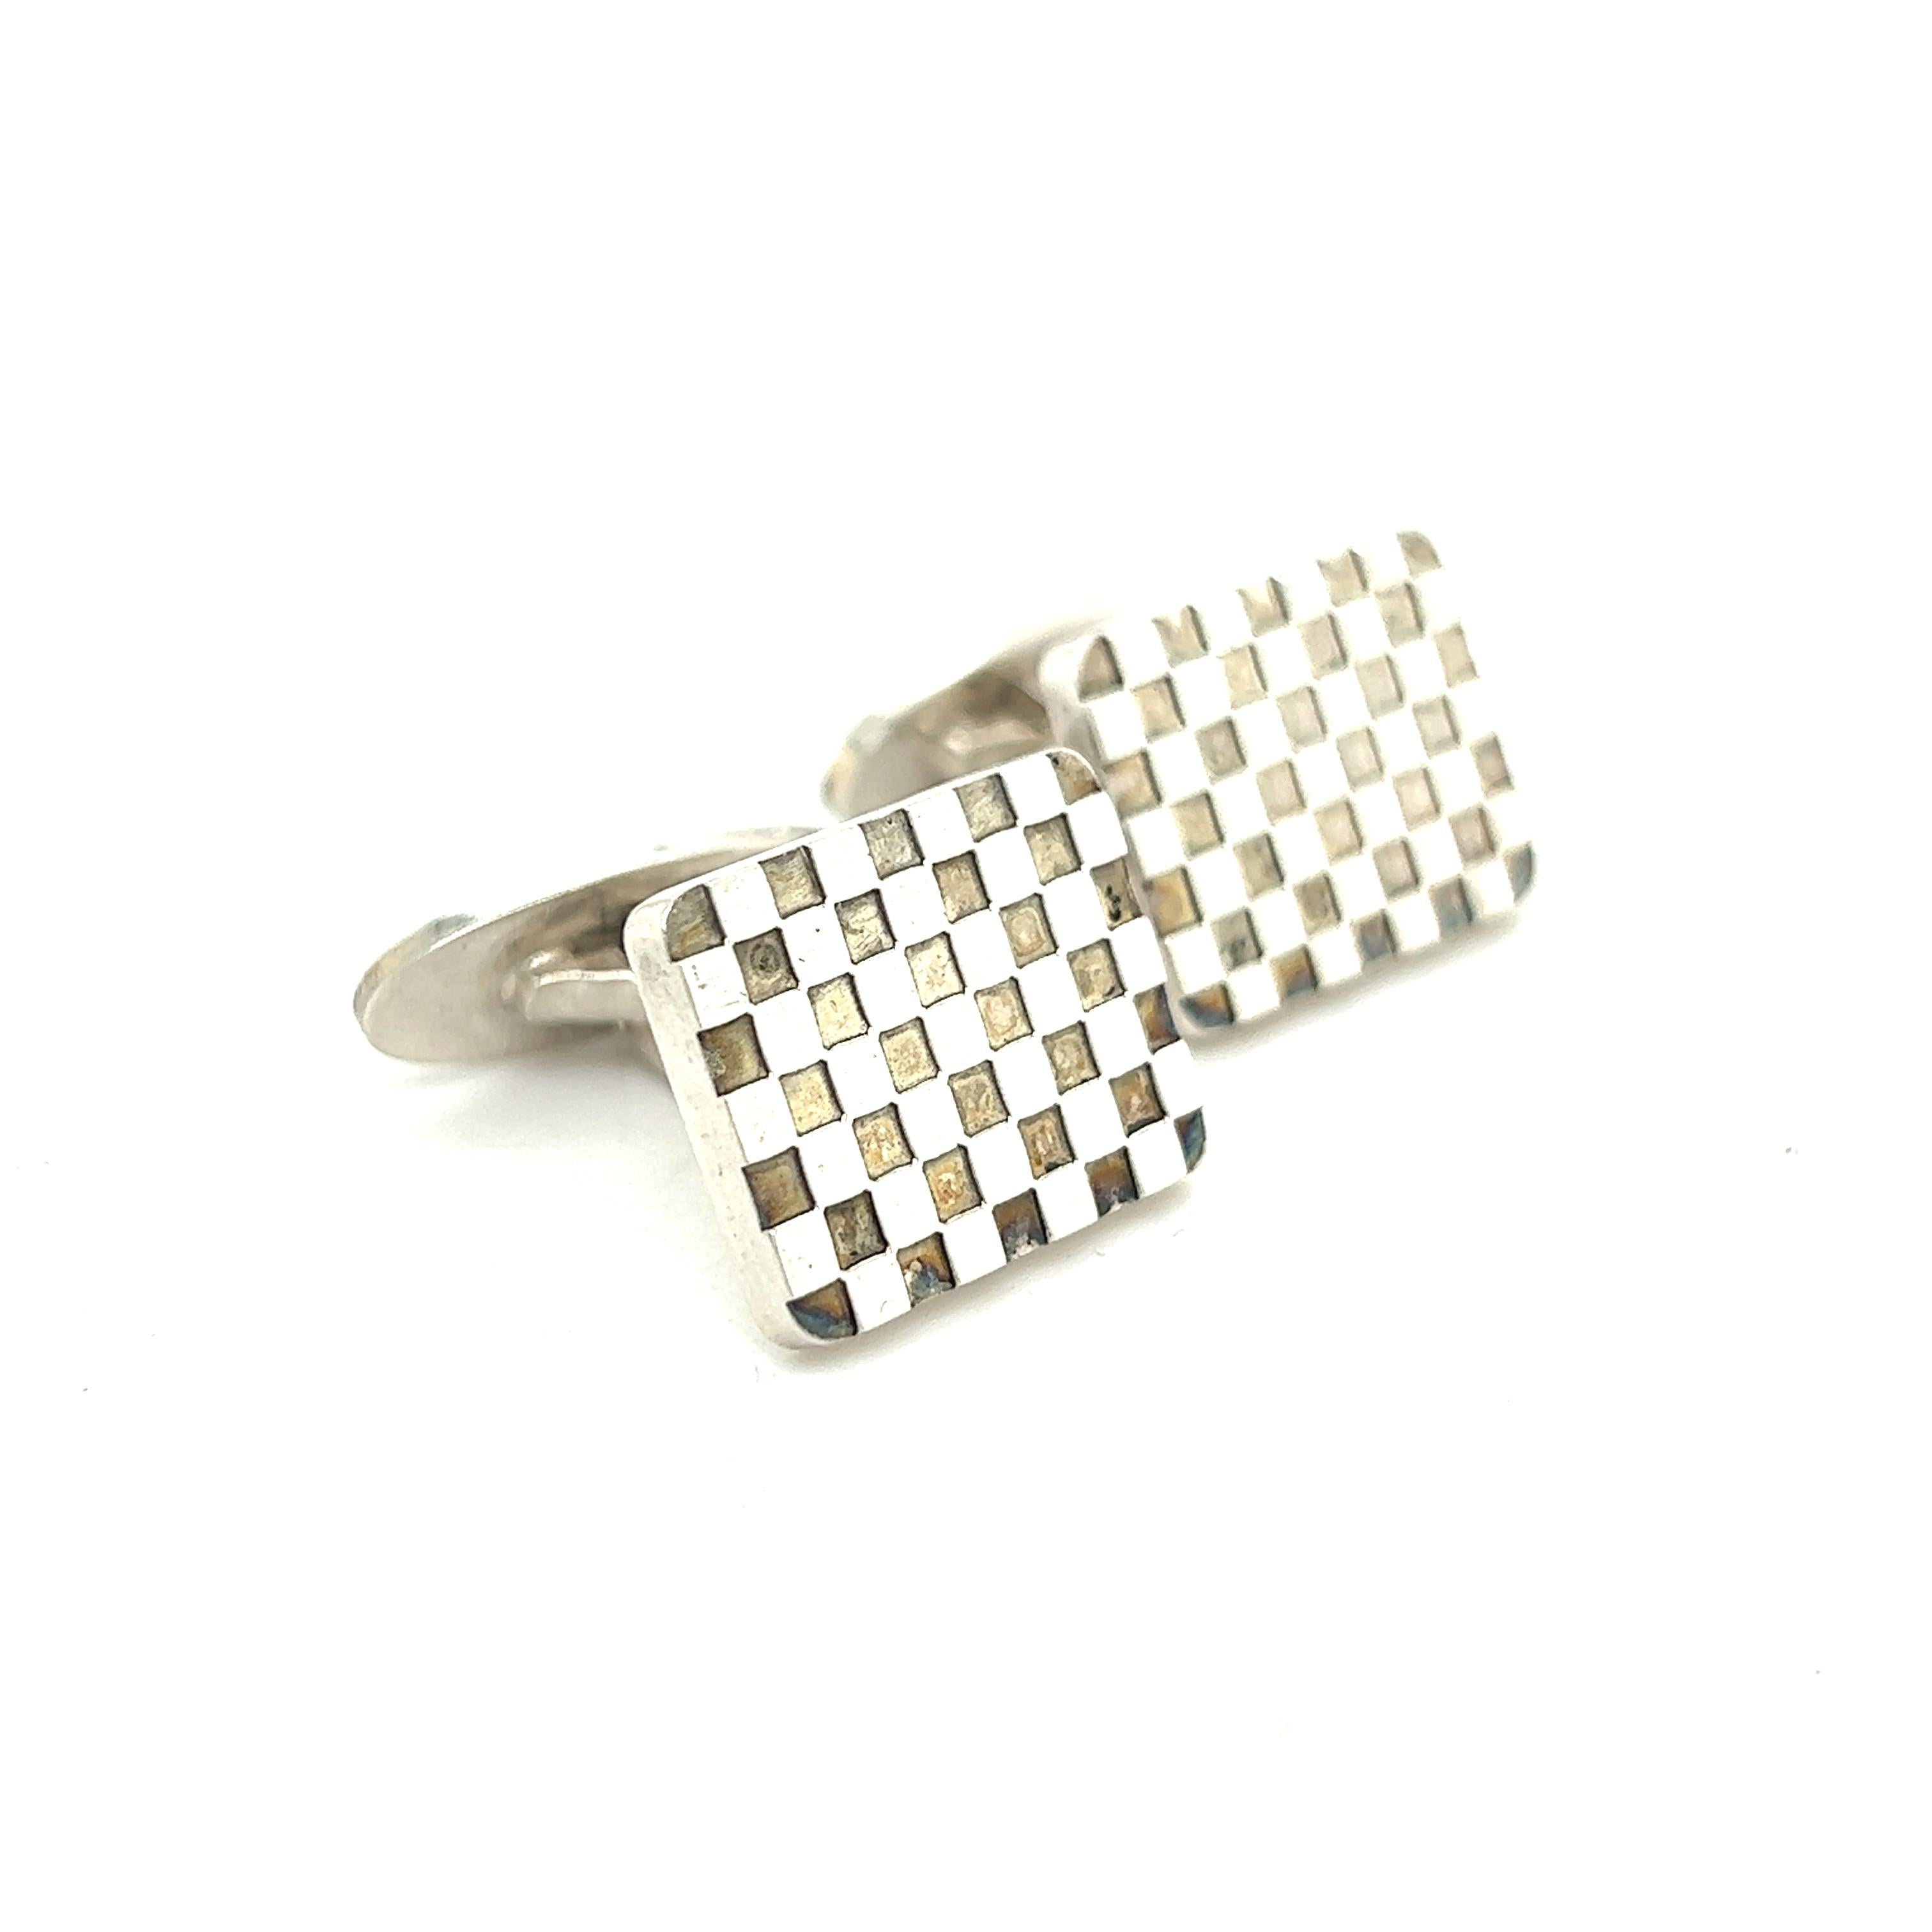 Authentic  Georg Jensen Estate Checkerboard Cufflinks Silver GJ16

These elegant Authentic Georg Jensen Men's Checkerboard Cufflinks are made of sterling silver and have a weight of 16.40 grams.

TRUSTED SELLER SINCE 2002

PLEASE SEE OUR HUNDREDS OF